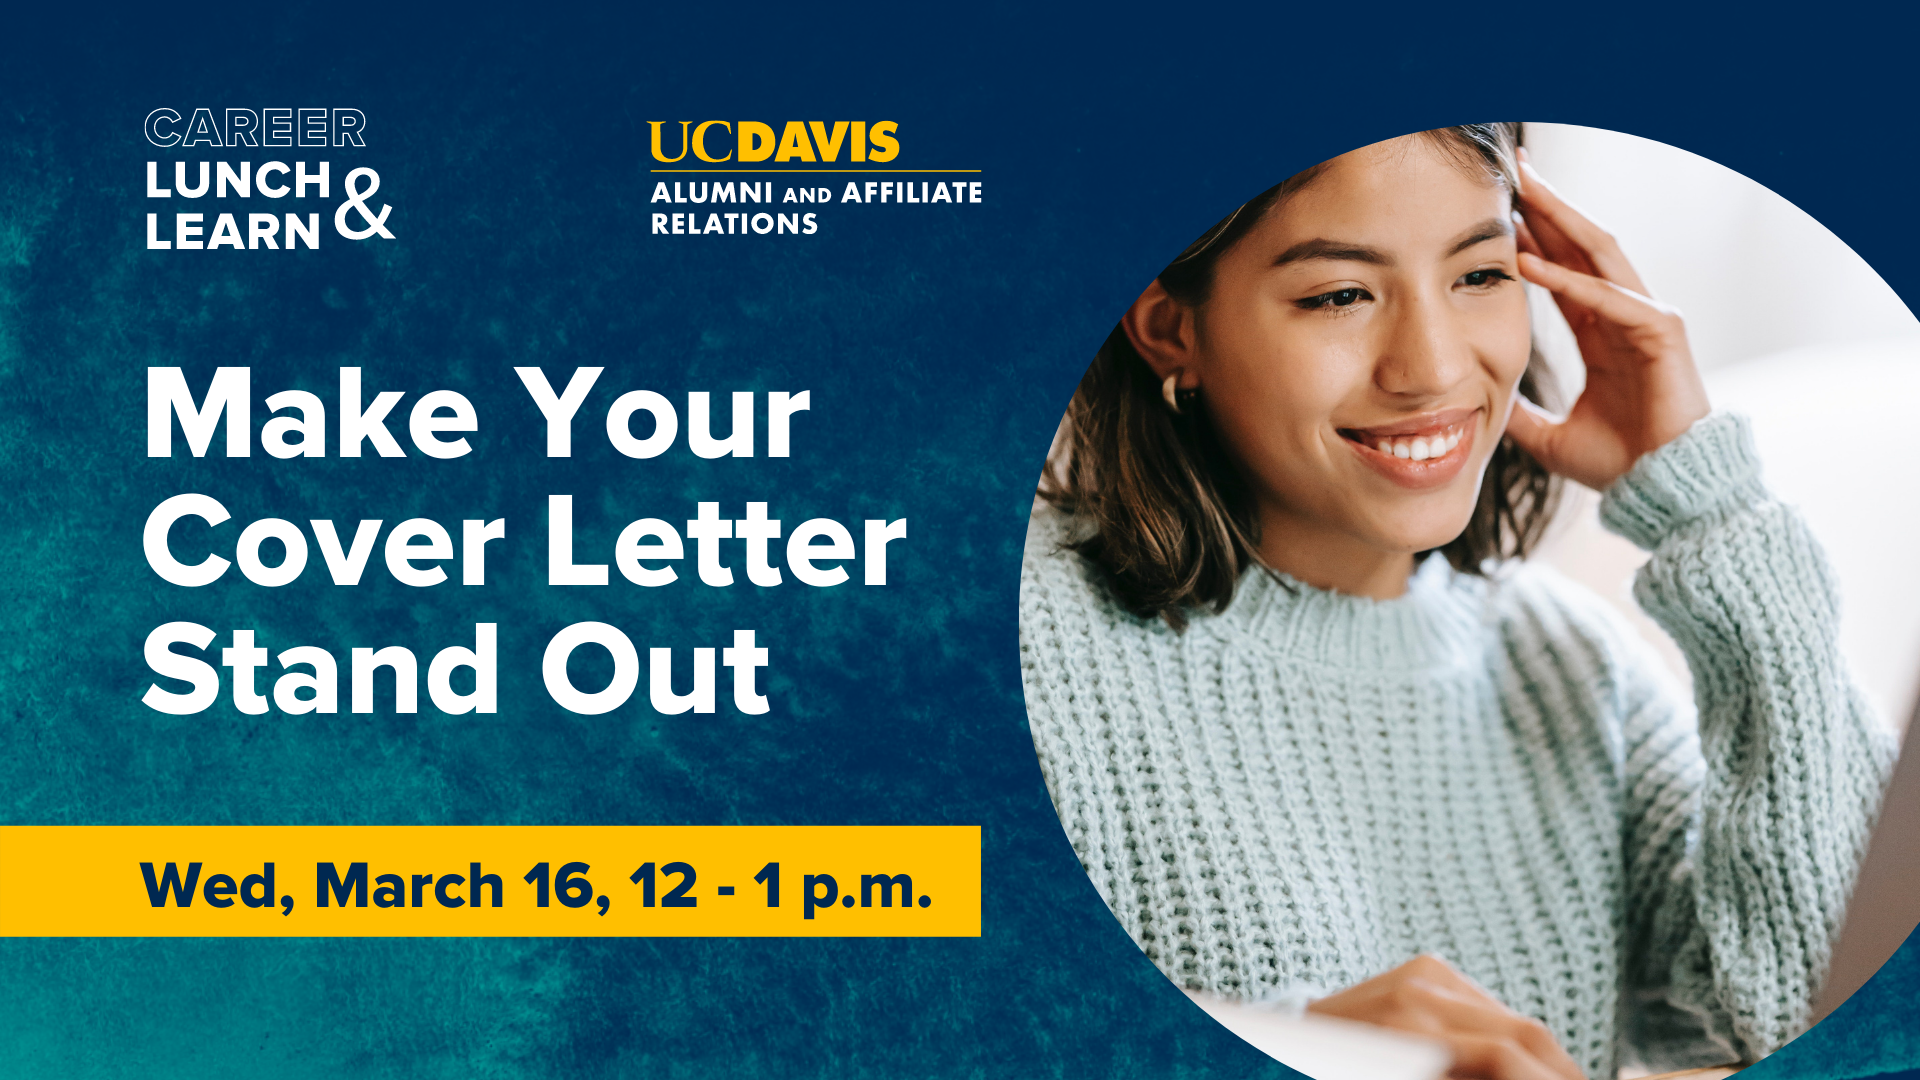 Text reads: Career Lunch & Learn, UC Davis Alumni and Affiliate Relations, Make Your Cover Letter Stand Out, Wed. March 16, 12-1 PM. Image of woman smiling and looking at computer screen.